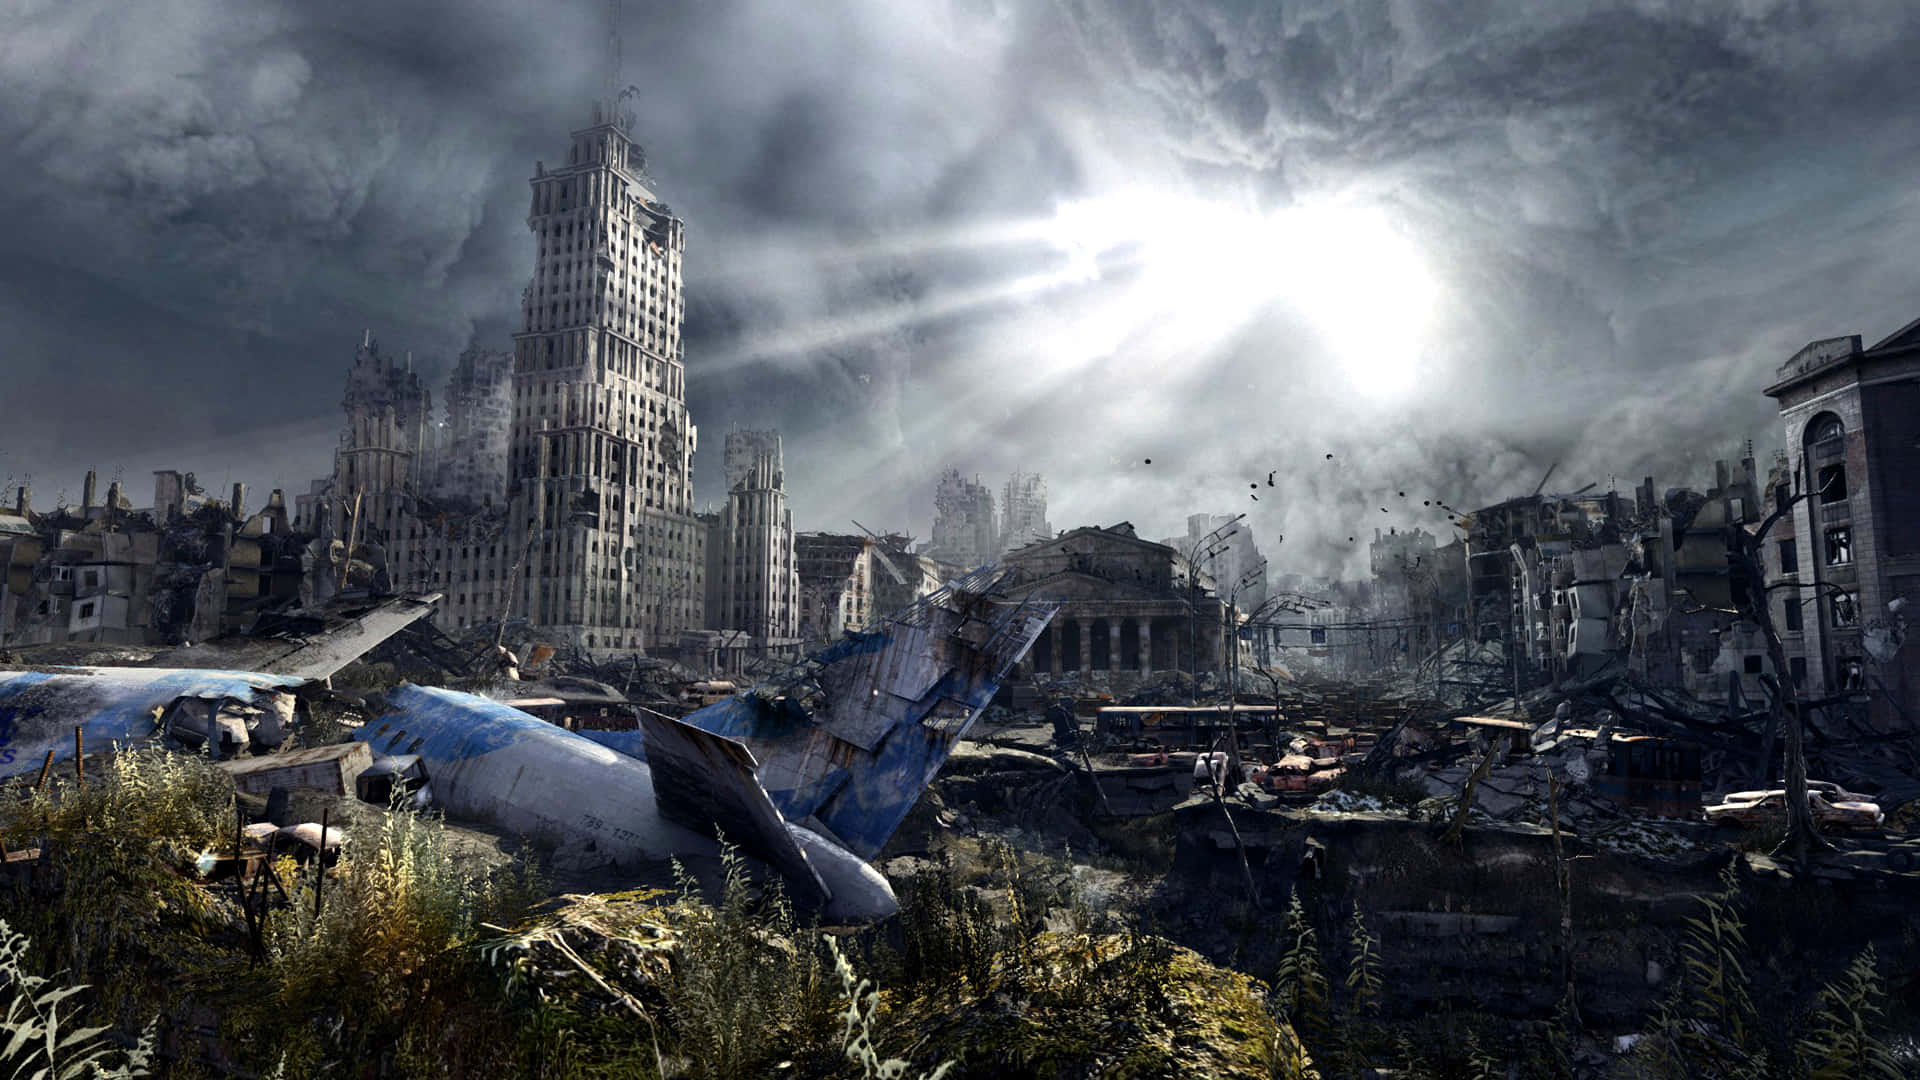 Adventurer exploring the captivating post-apocalyptic world of Fallout 4 Wasteland Wallpaper